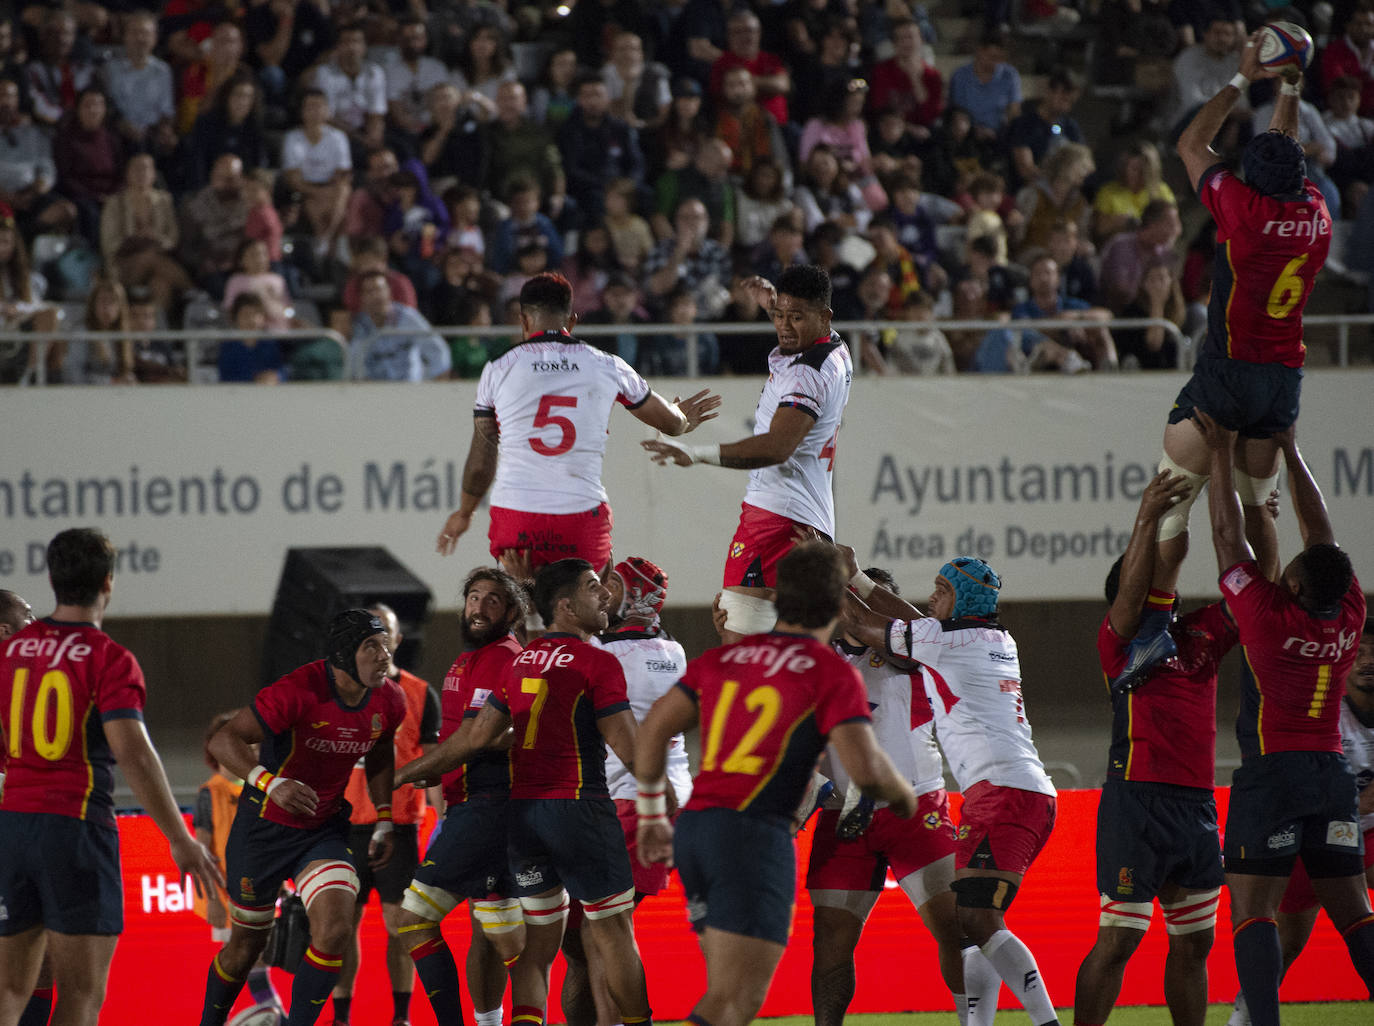 Spain win the ball during the match against Tonga. 